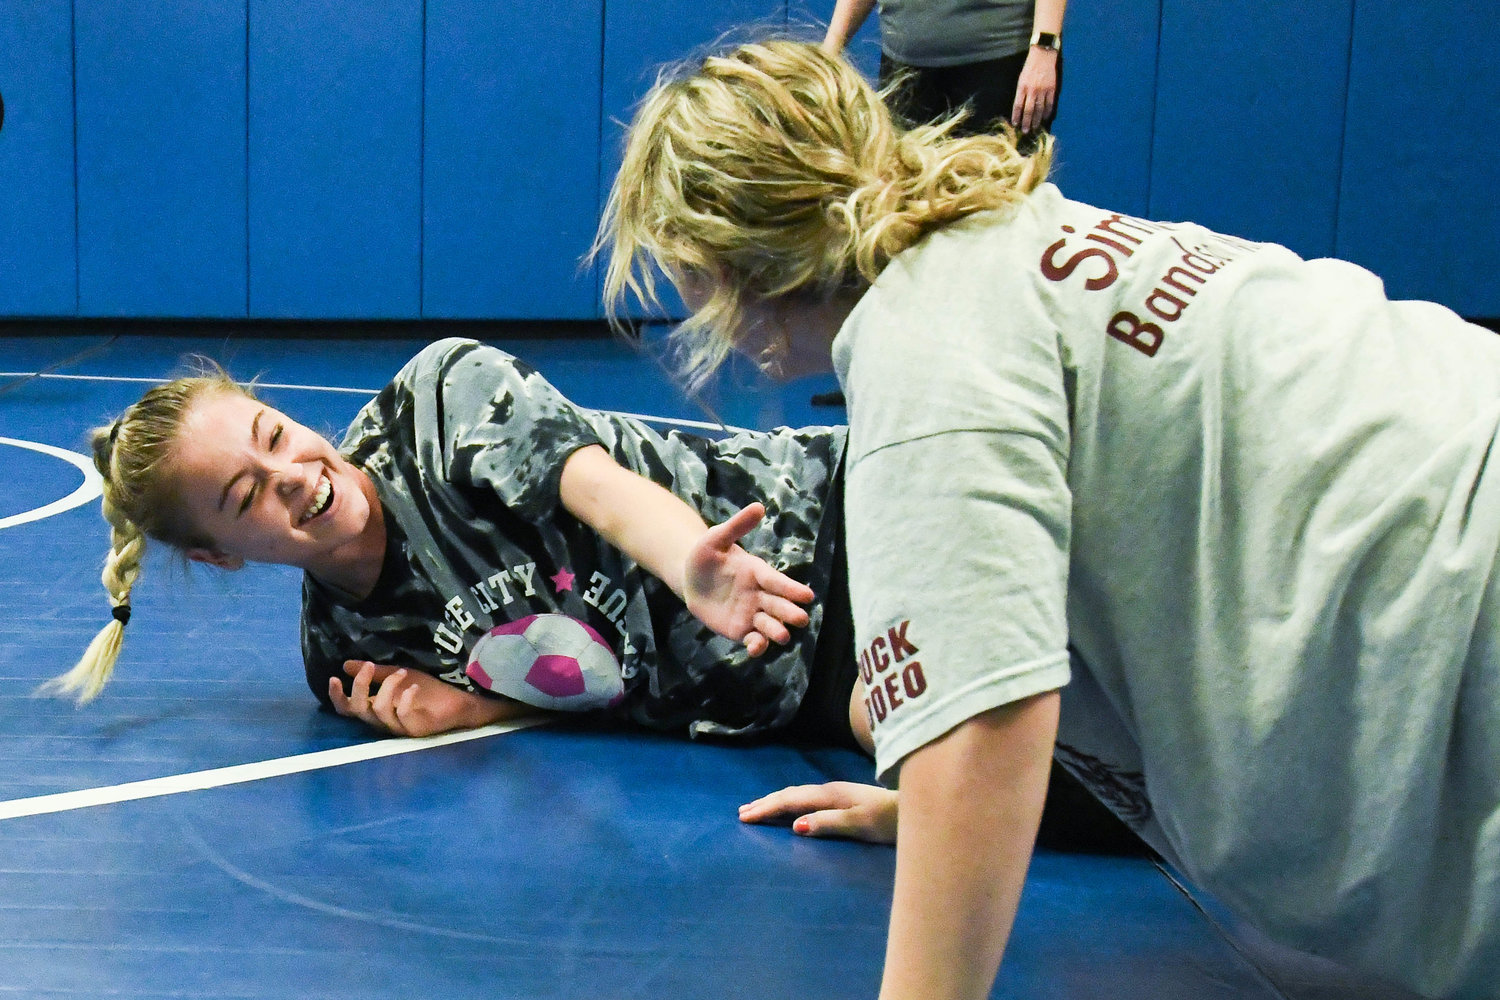 From left, Camden wrestler McKenzie Aldridge shares a laugh with Megan Trautner after getting taken down hard to the mat during practice on Monday at Camden Elementary School.